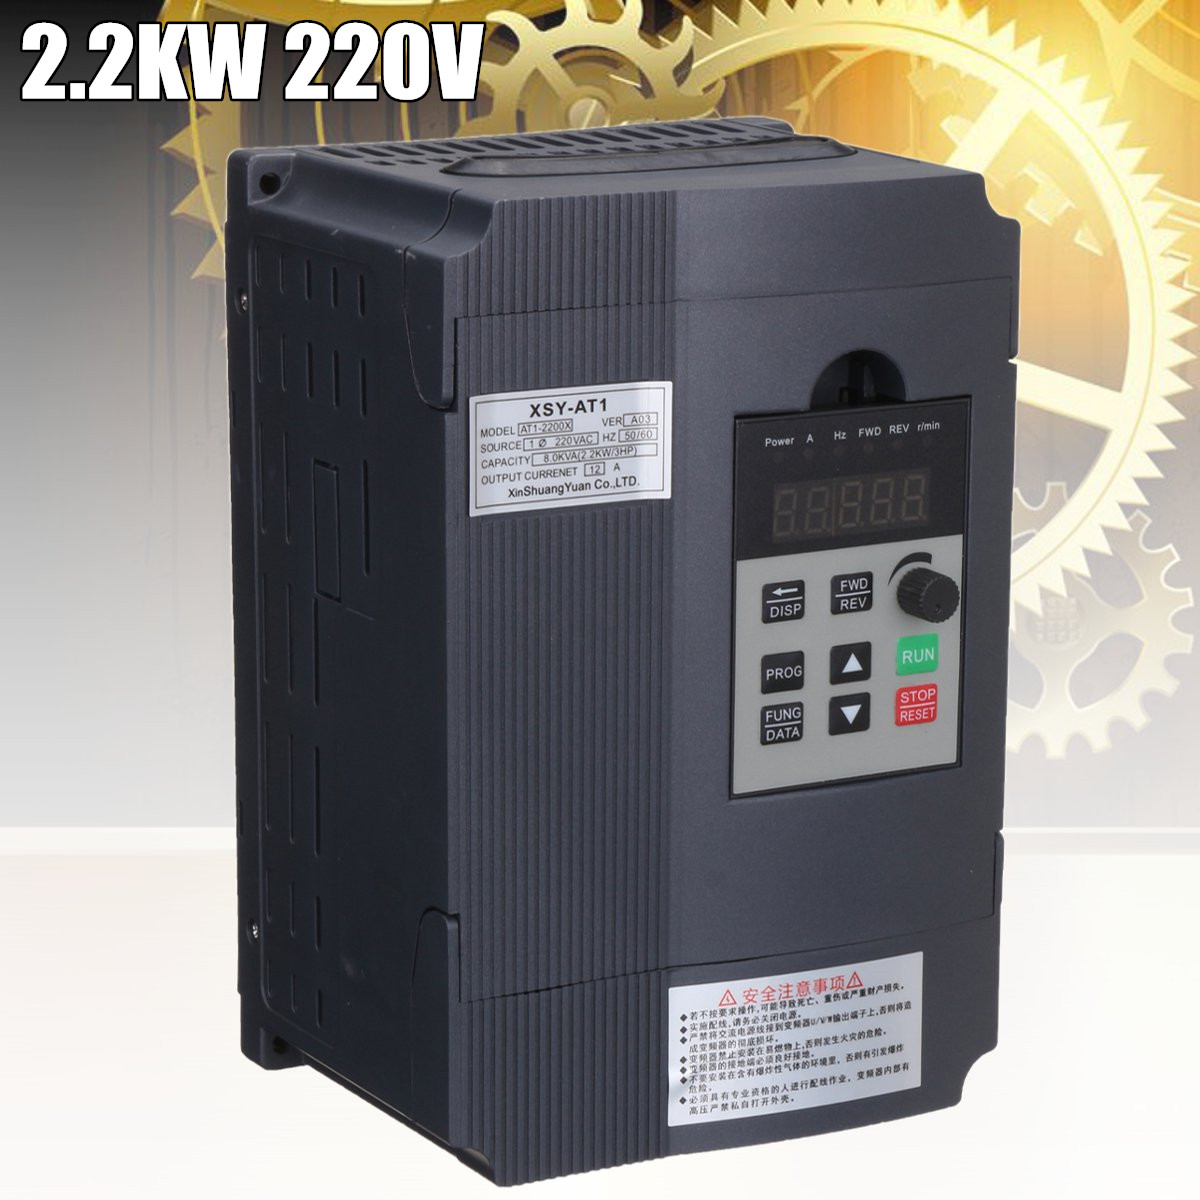 22KW-220V-12A-Single-Phase-Input-3-Phase-Output-PWM-Frequency-Converter-Drive-Inverter-VF-Vector-Con-1288332-1